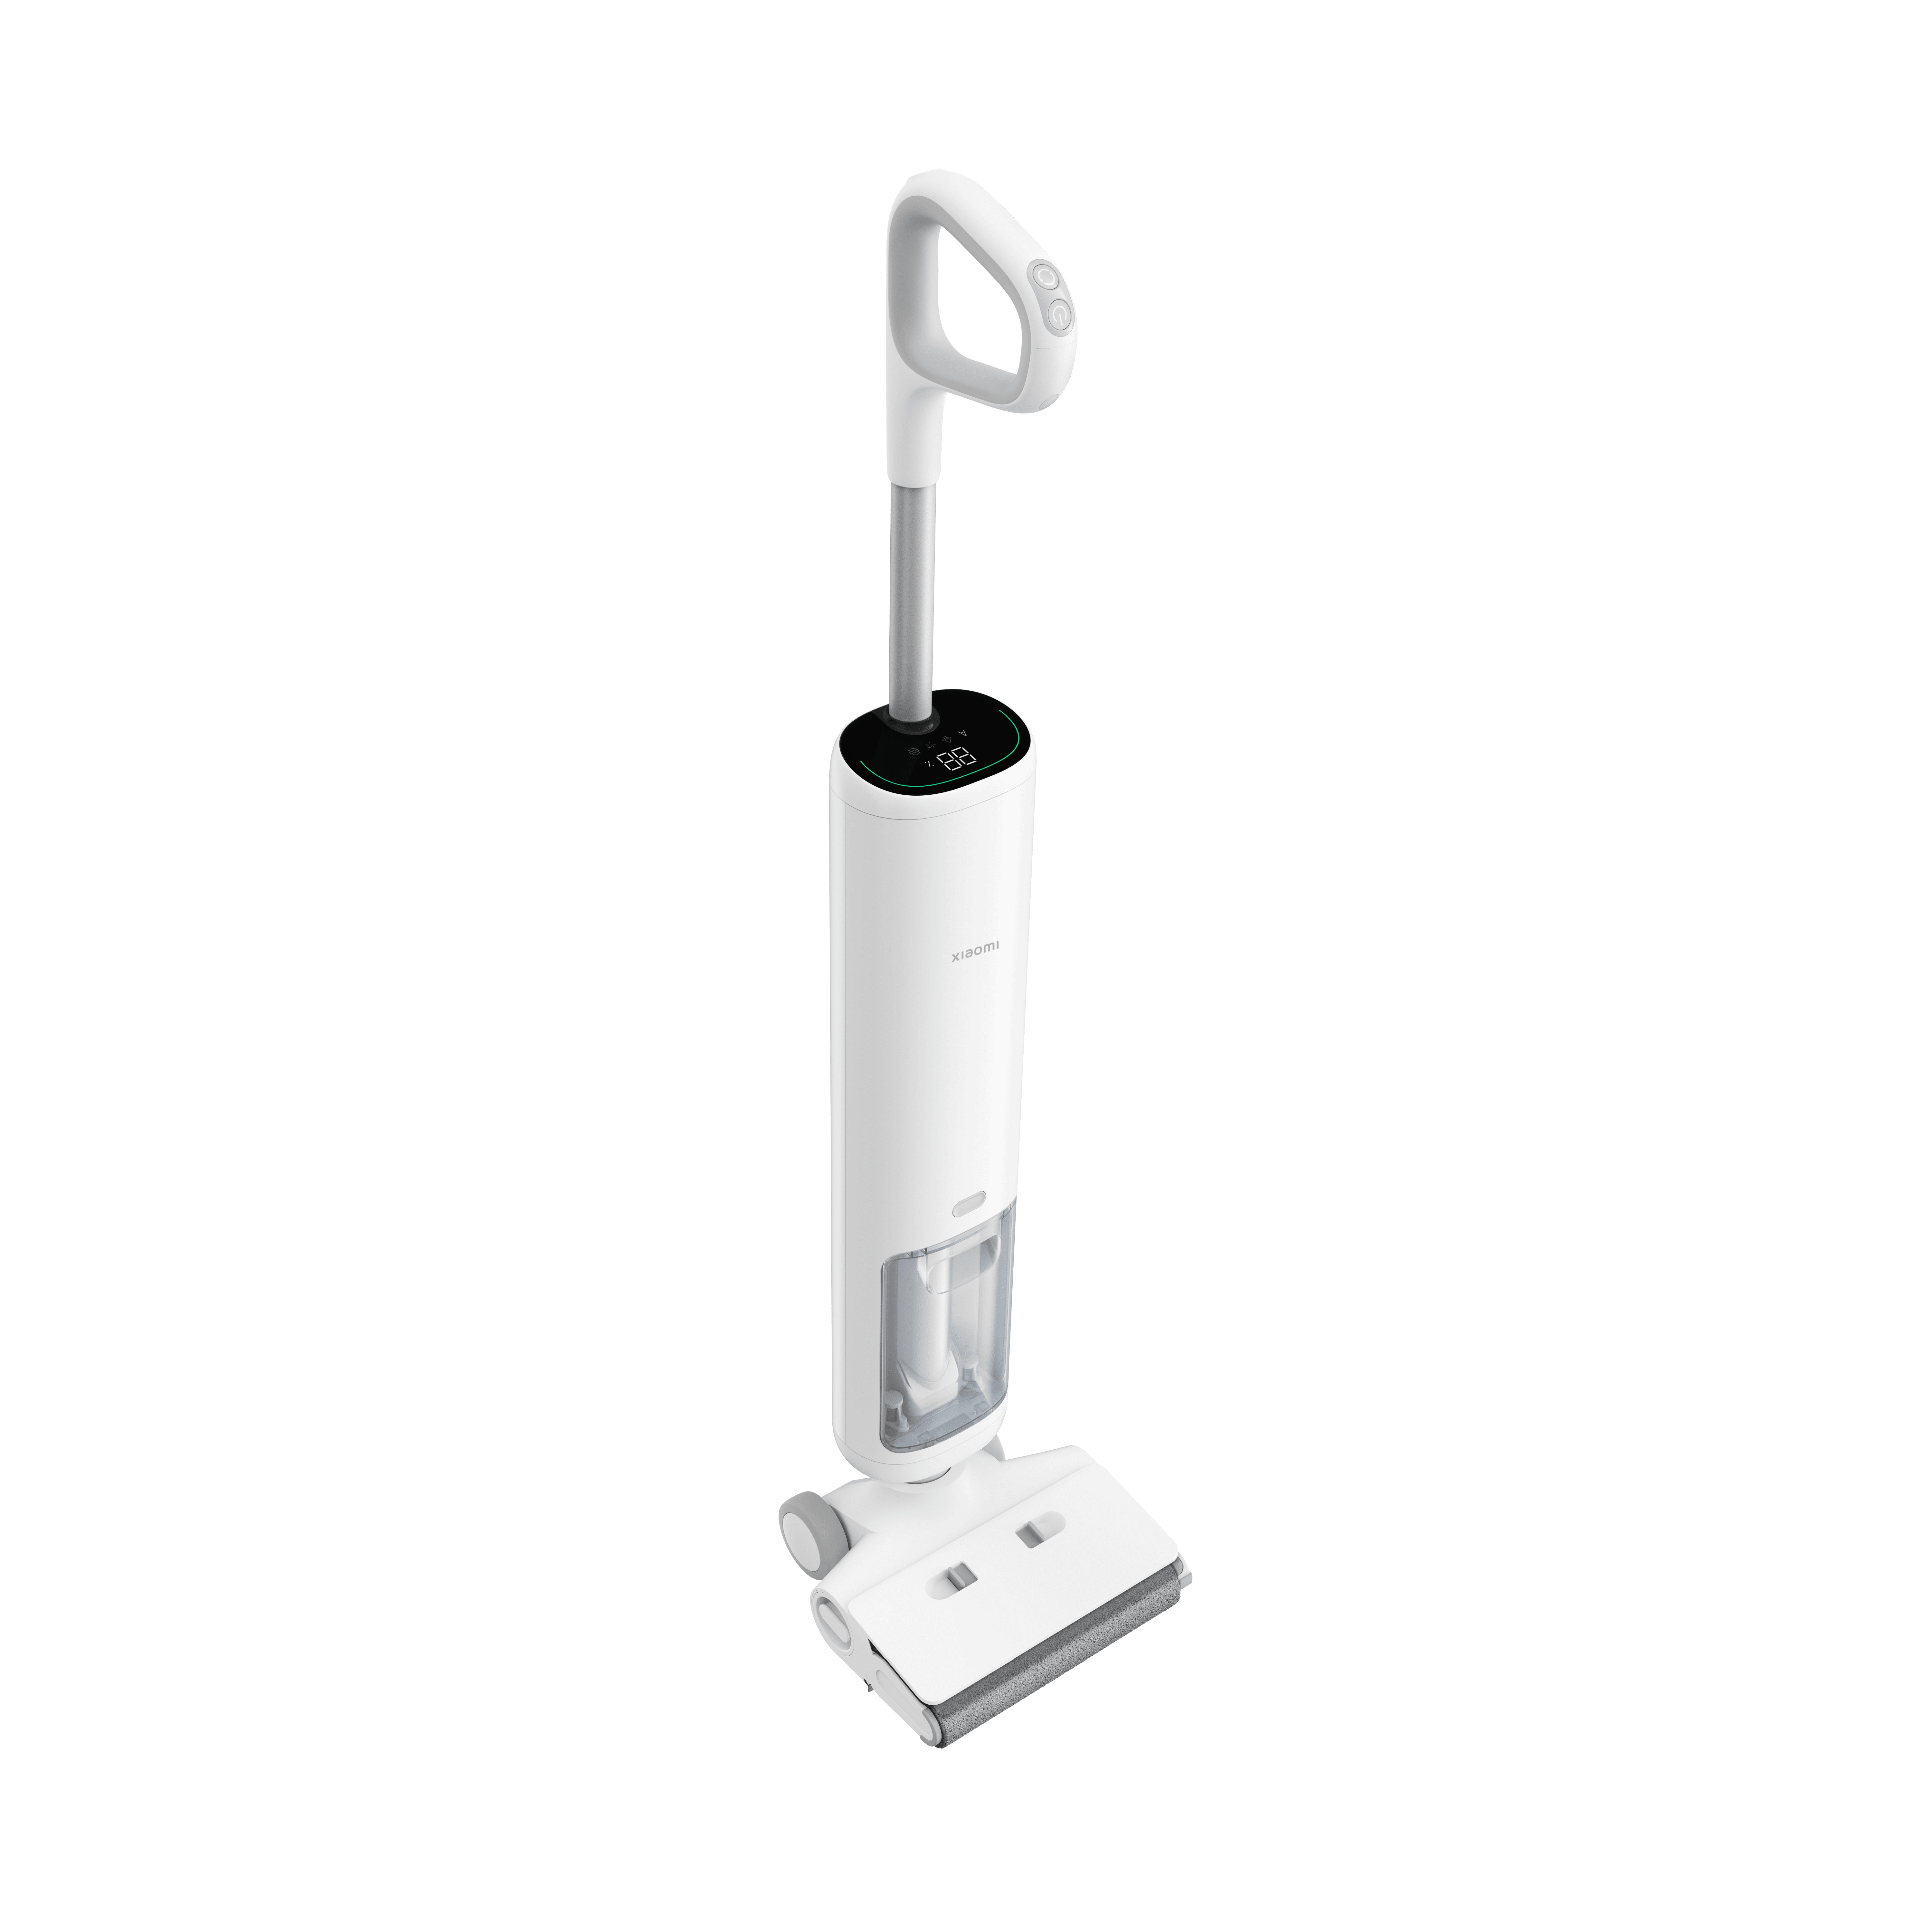 Xiaomi Truclean W10 Pro Wet Dry Vacuum, , large image number 3